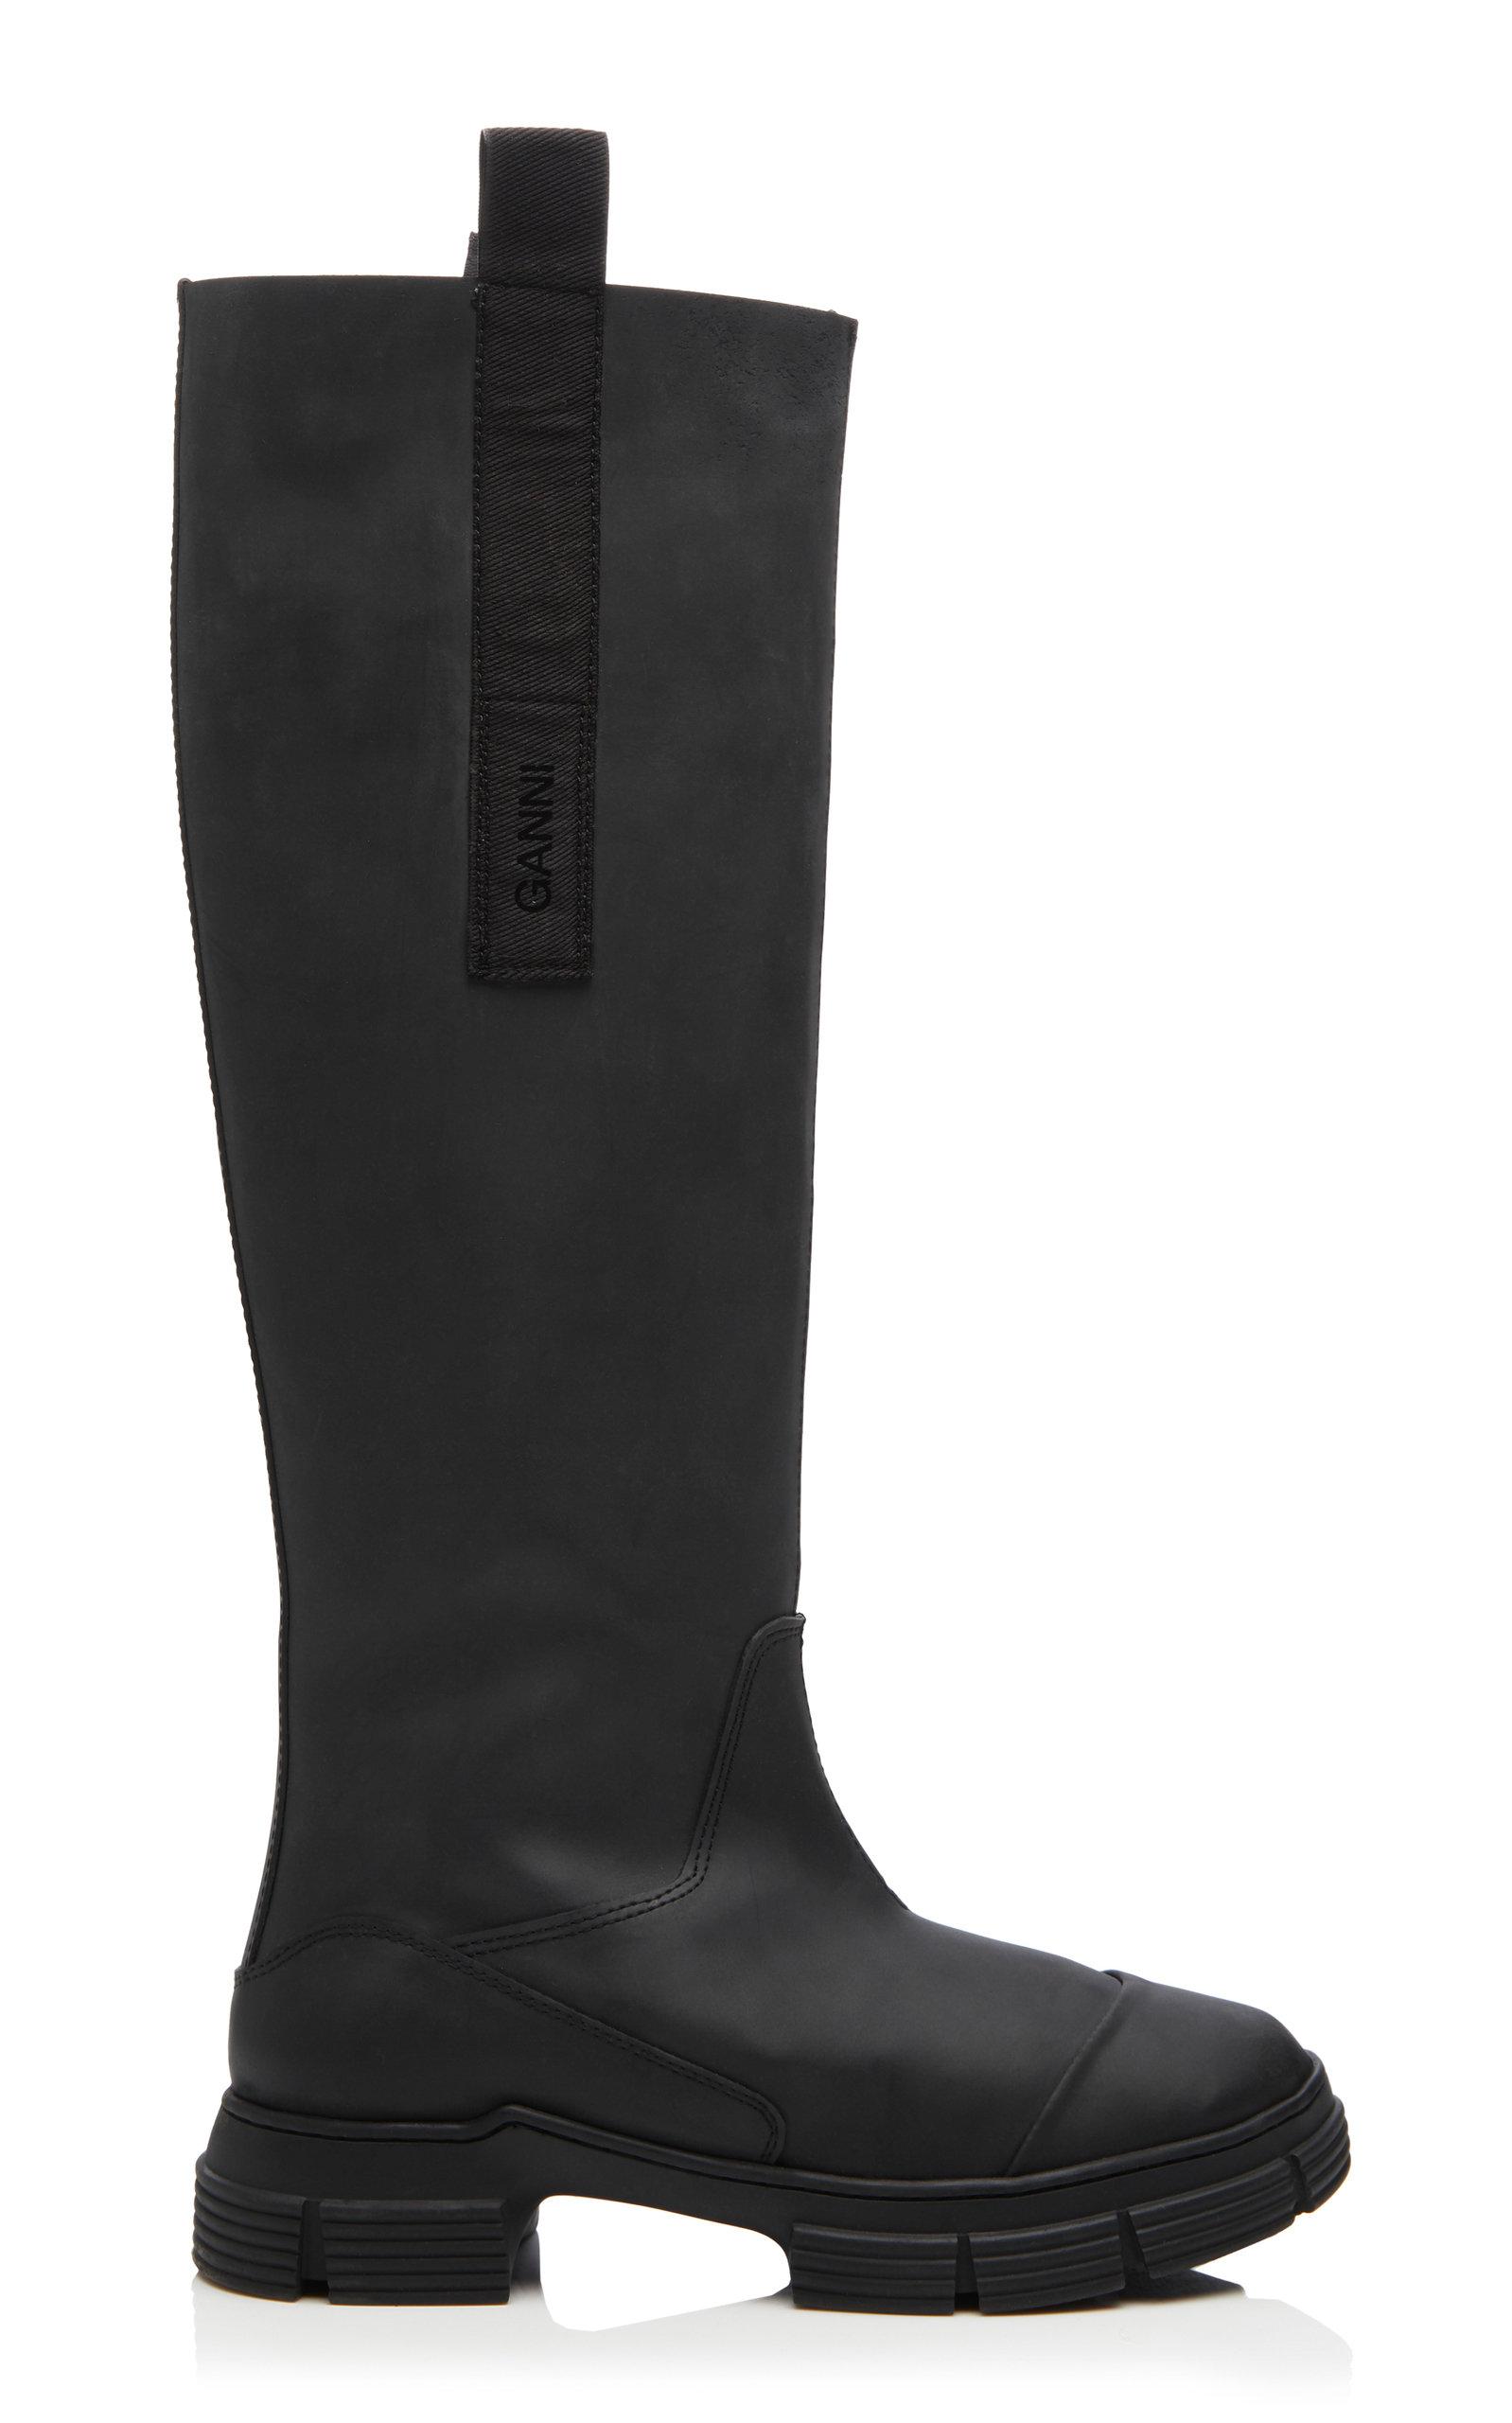 Ganni Rubber Knee-high Boots in Black - Lyst